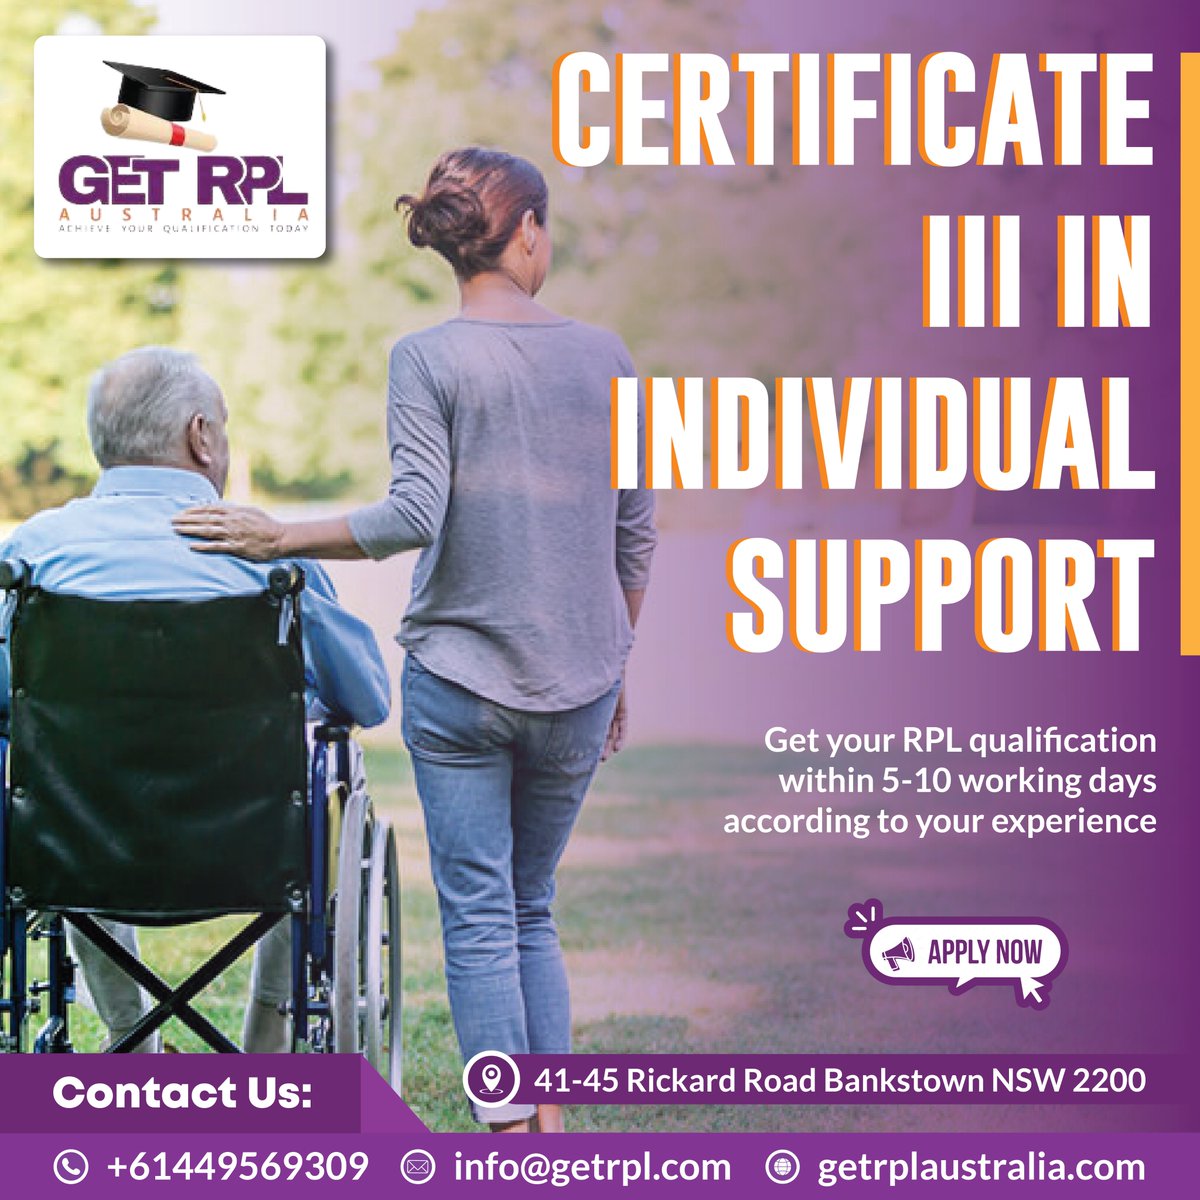 'Unlock the door to a fulfilling career in support services with our Certificate III. Your passion, our expertise .
Contact Us:
Call:  0449 569 309
Email: info@getrpl.com
#RPL #individualsupport #Disability #aflcrowslions #qualification